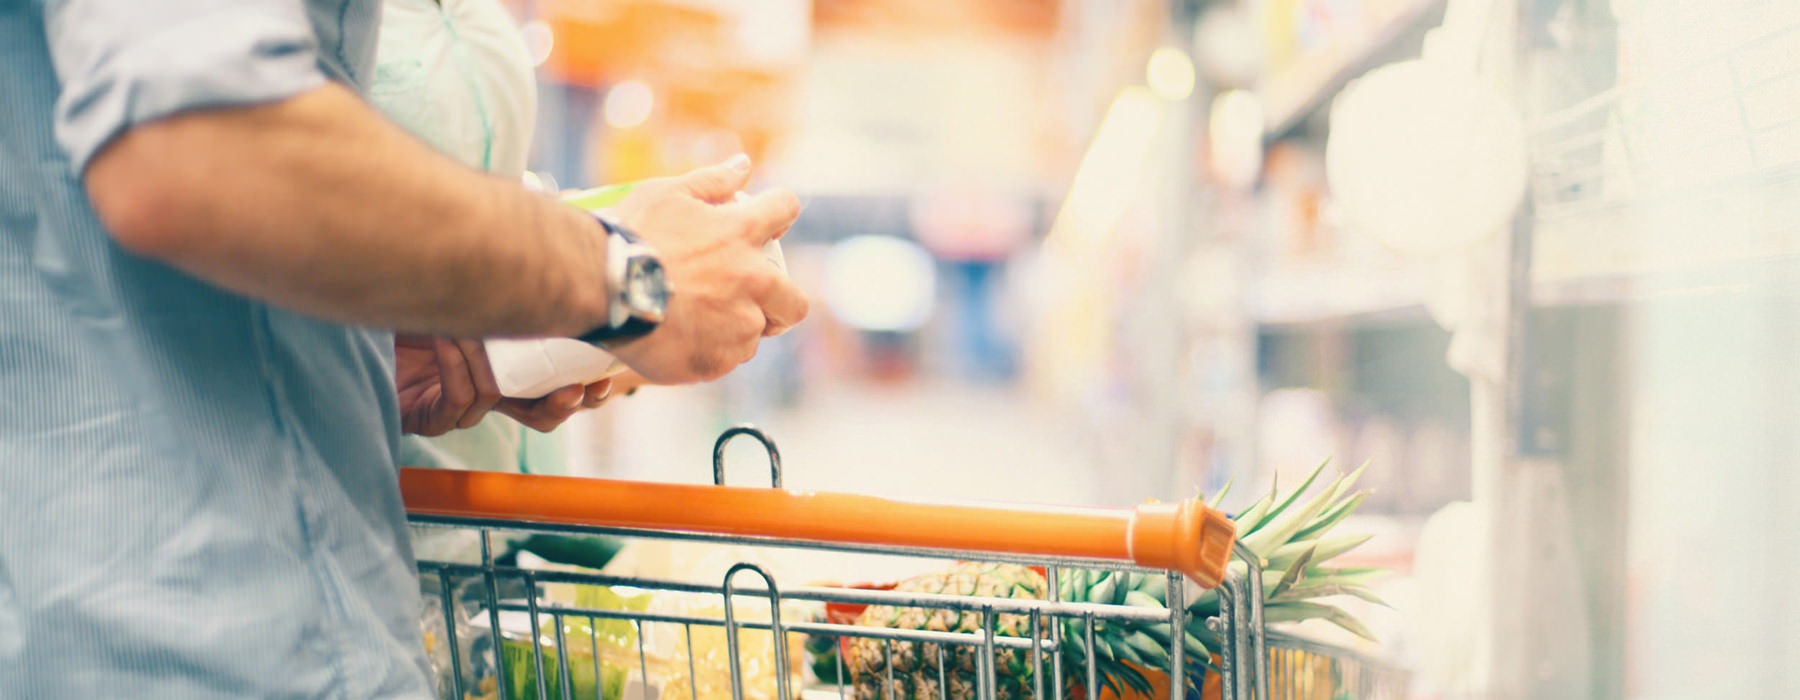 close up of man looking at a product by his shopping cart in grocery store